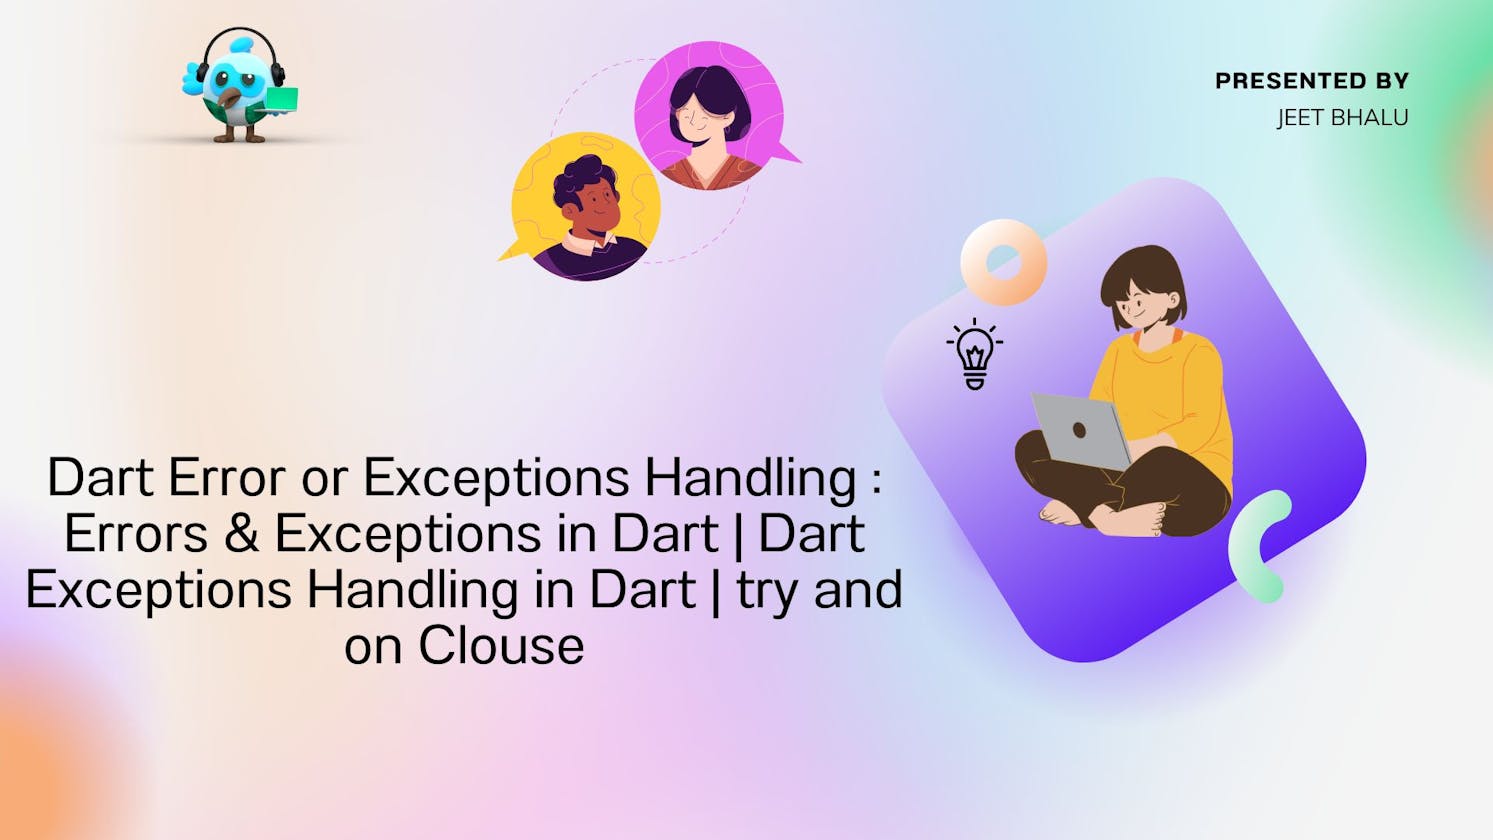 Dart Error or Exceptions Handling : Errors & Exceptions in Dart | Dart Exceptions Handling in Dart | try and on Clouse